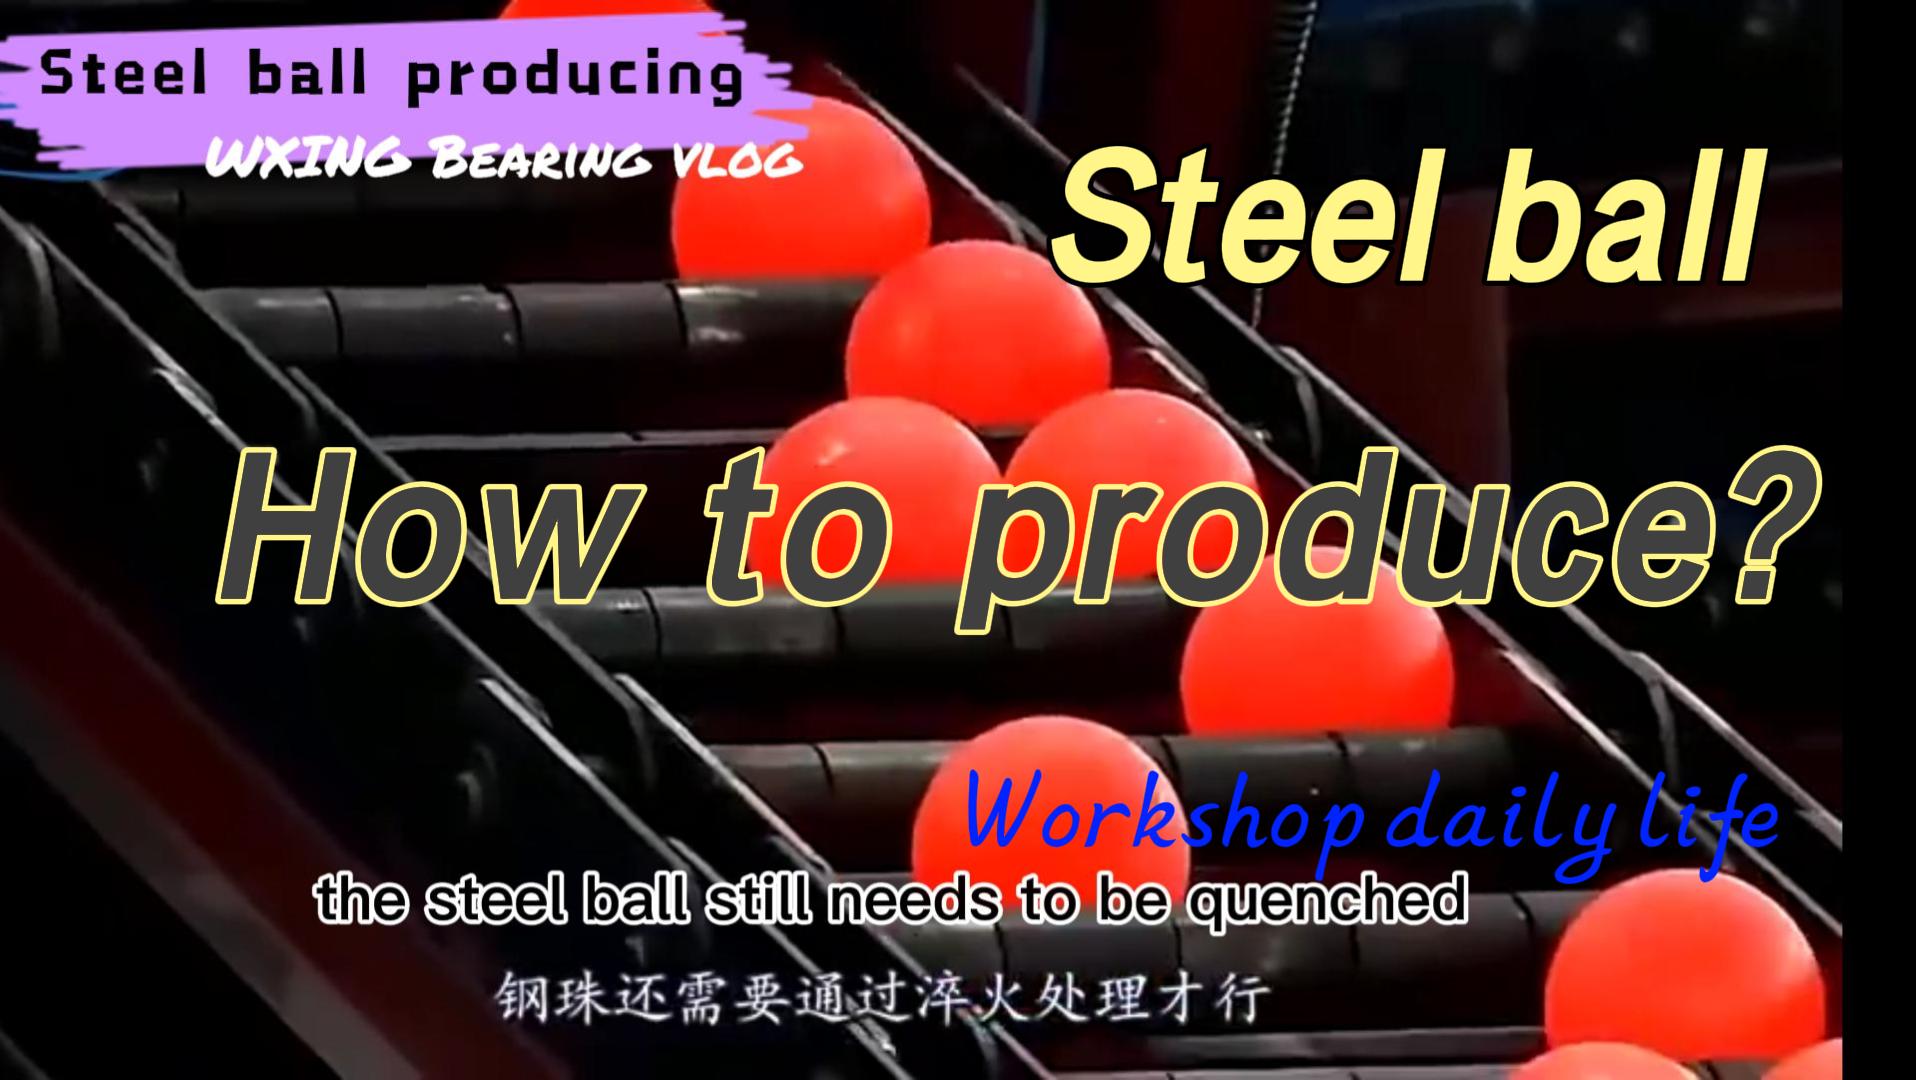 How the steel ball be produced?